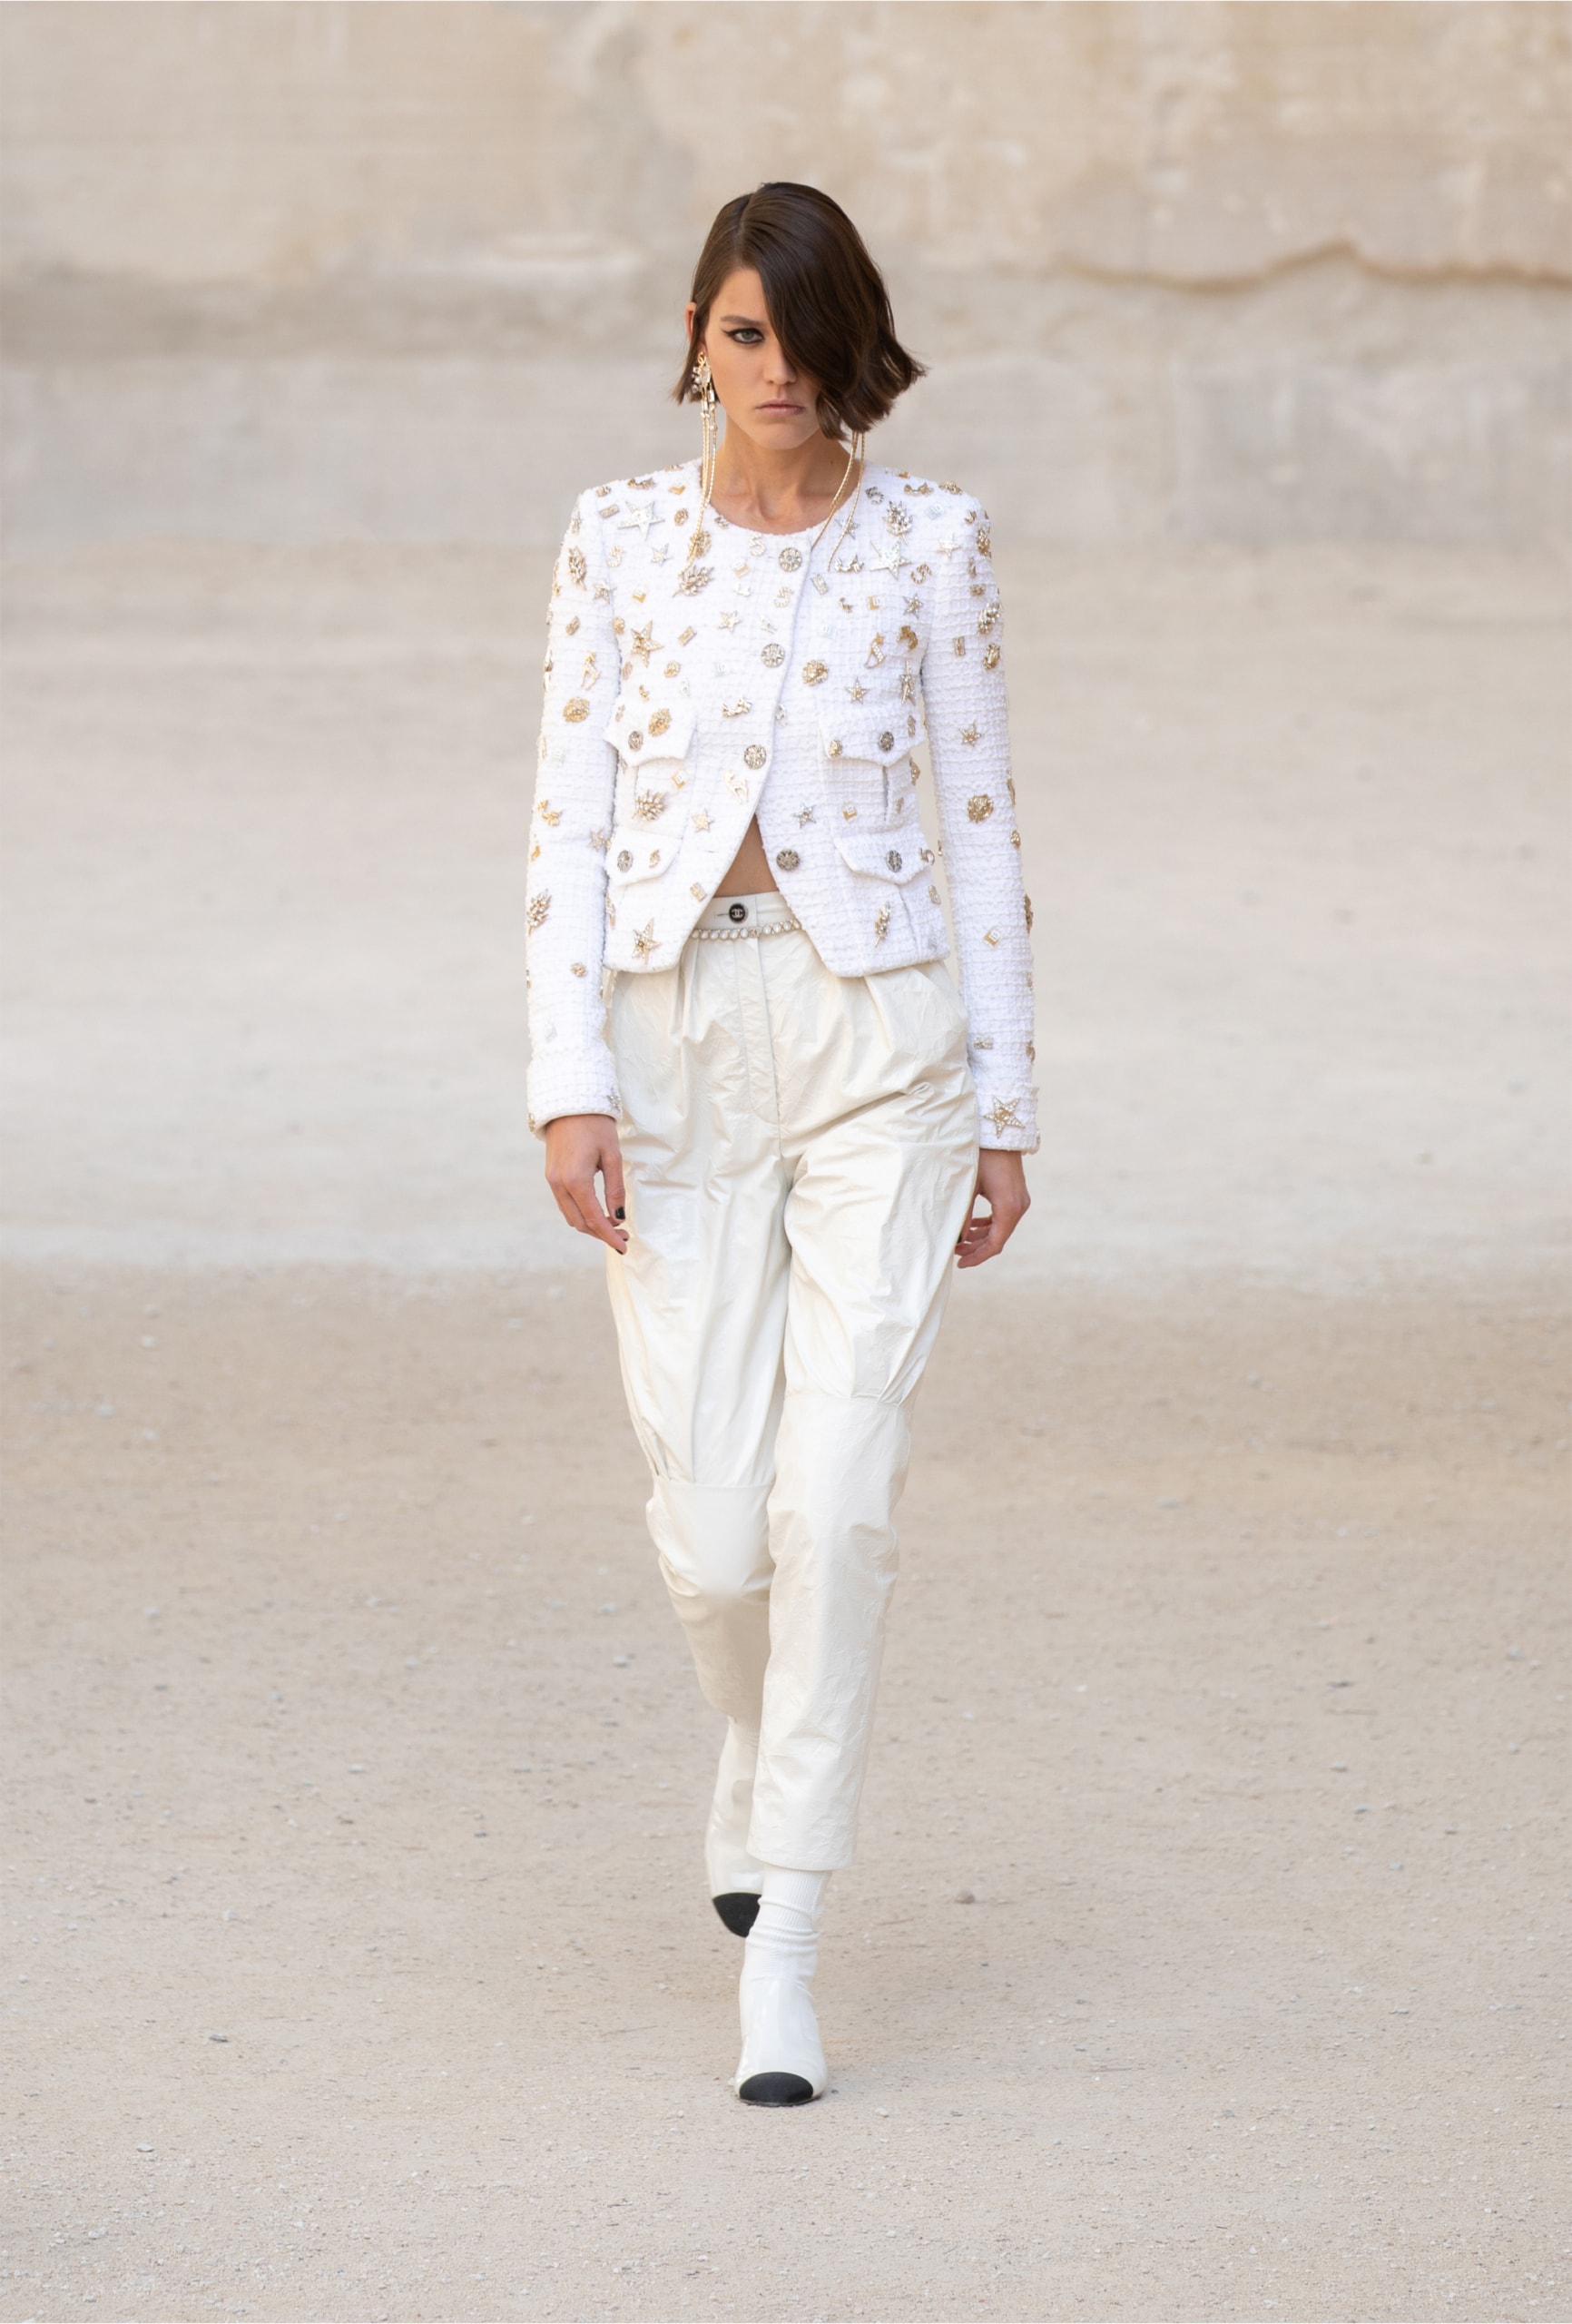 chanel cruise resort collection runway virginie viard provence punk rock jean cocteau tweed suits dresses 